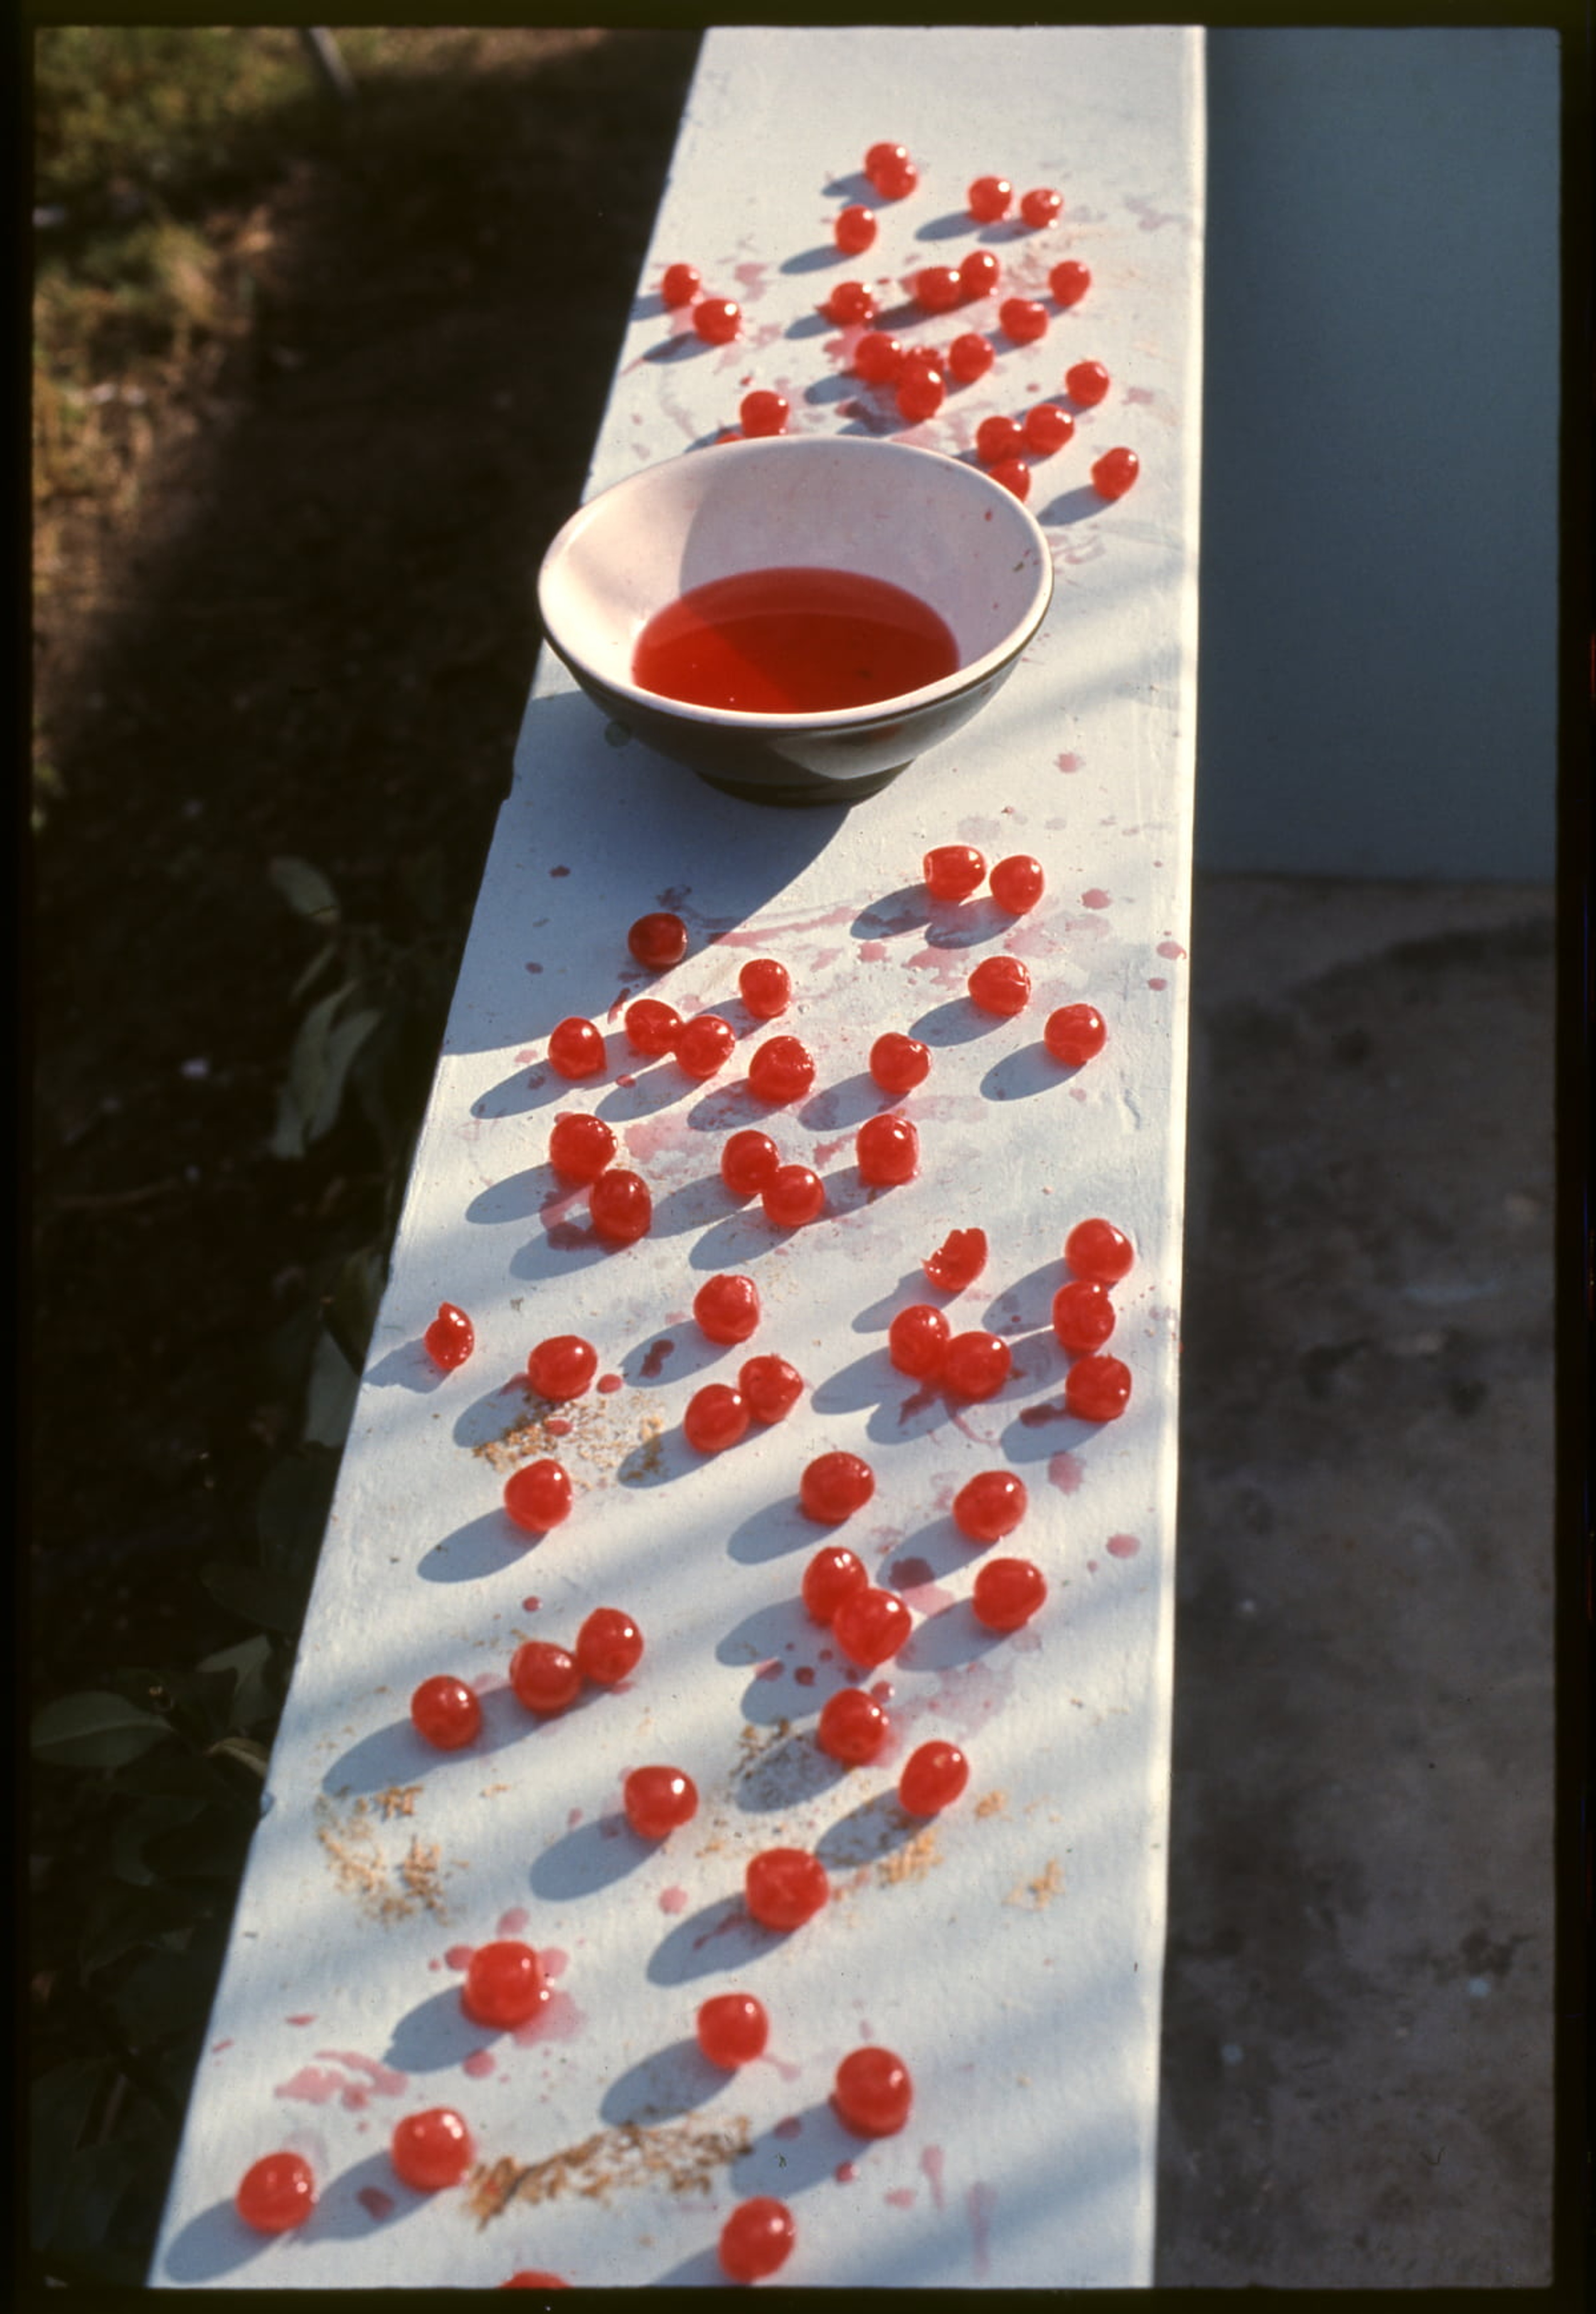 Photo of Cherries on a wall with a bowl full of cherry juice. Photo by Linda McCartney